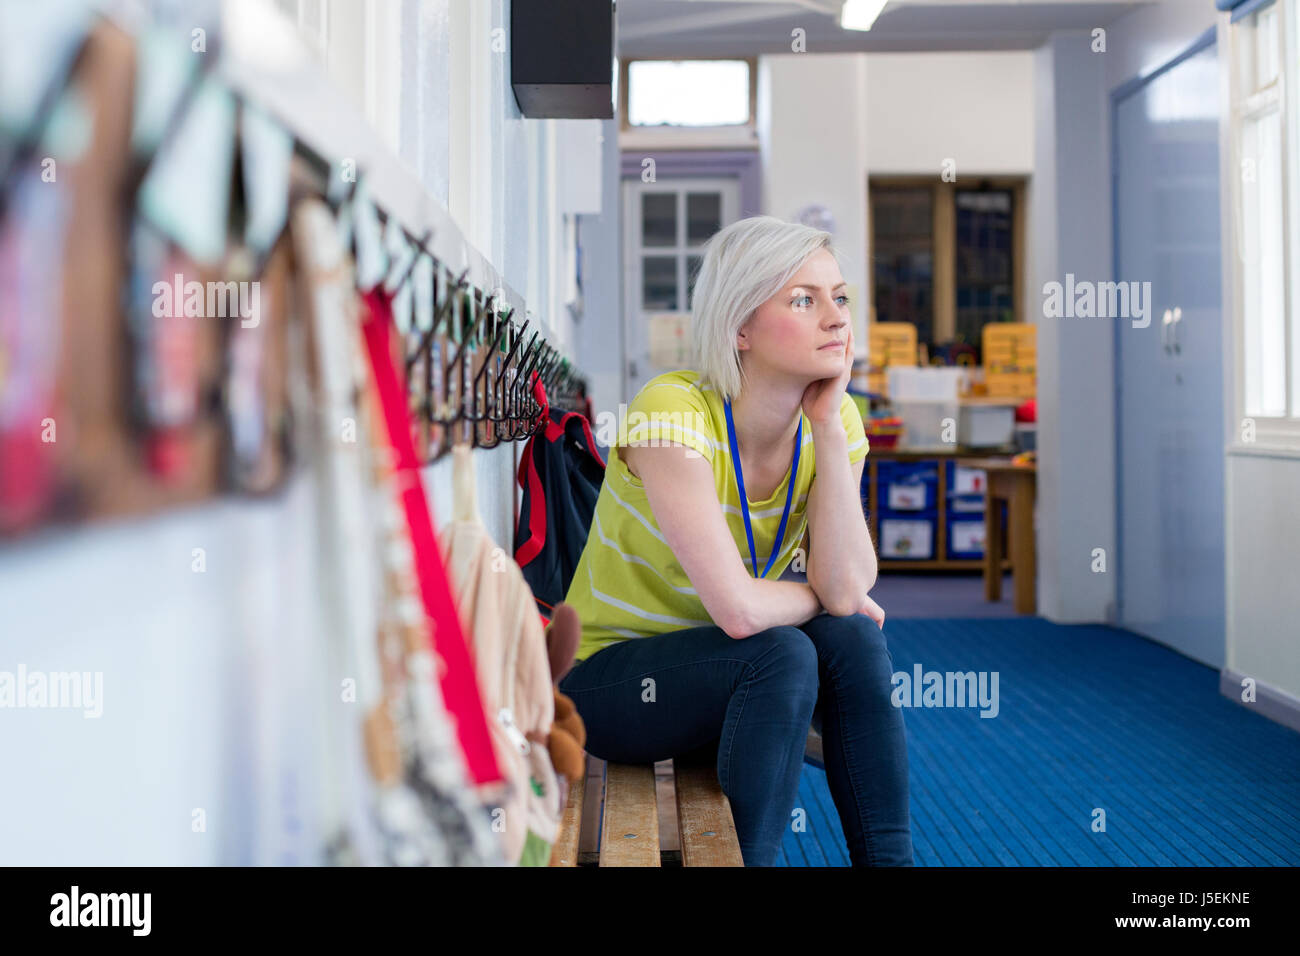 Young, female teacher sitting on a bench in the cloakroom of school. She is looking pensively out of the window. Stock Photo